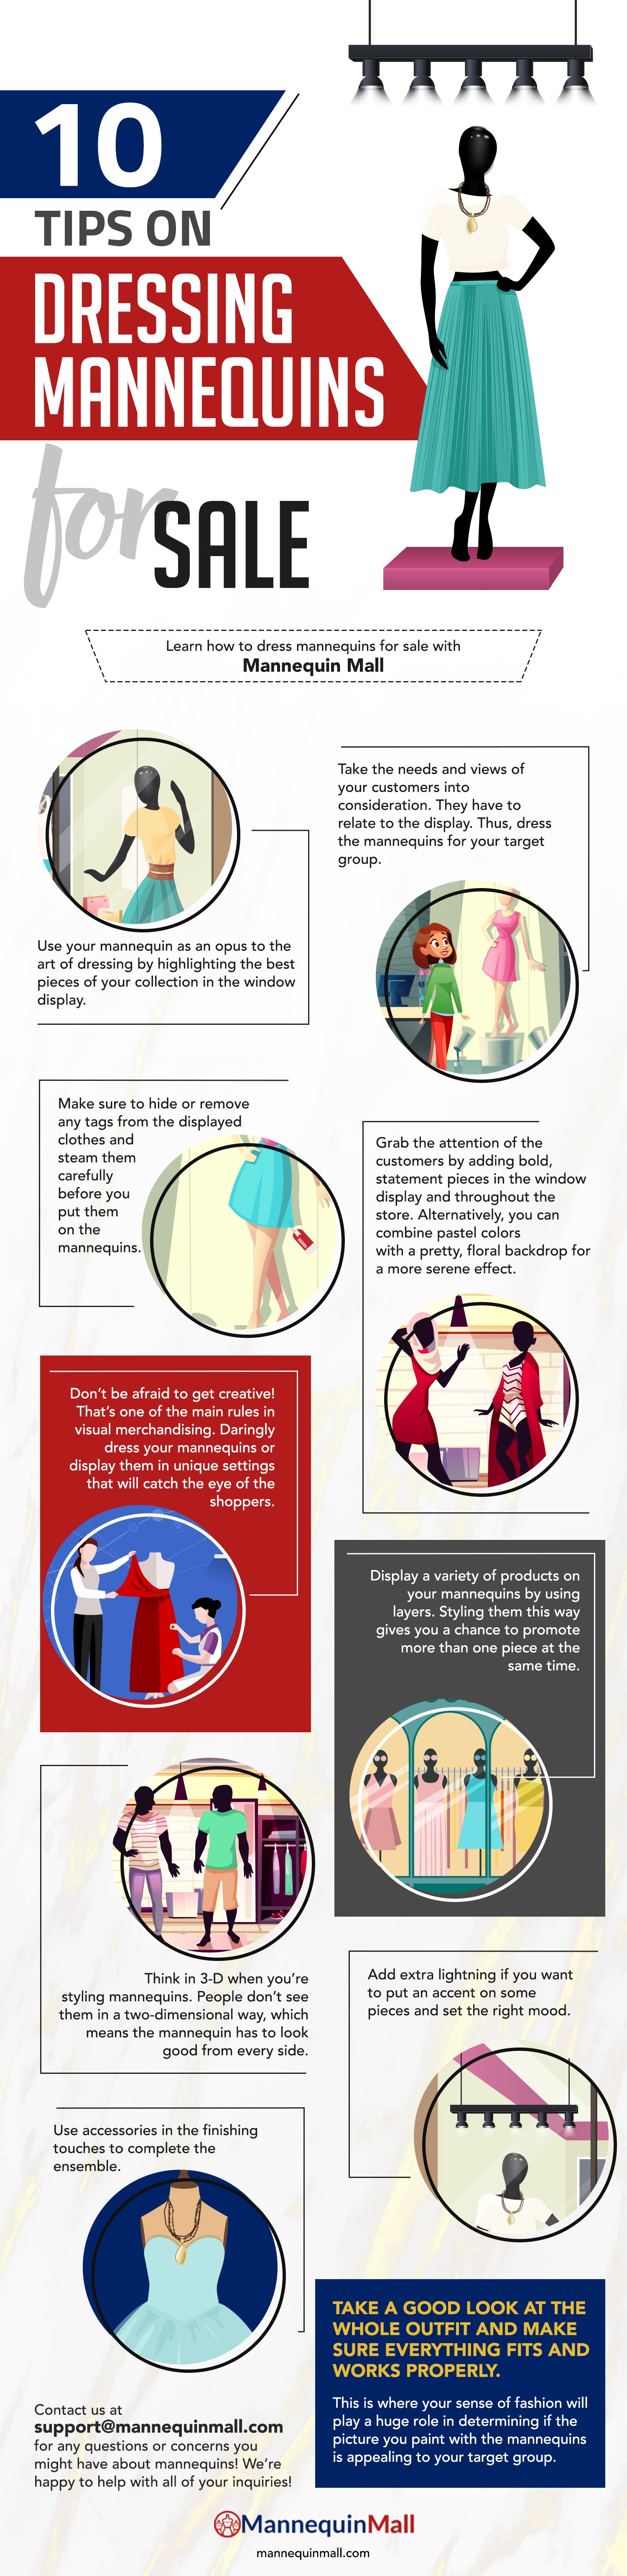 Dressing Mannequins Infographic